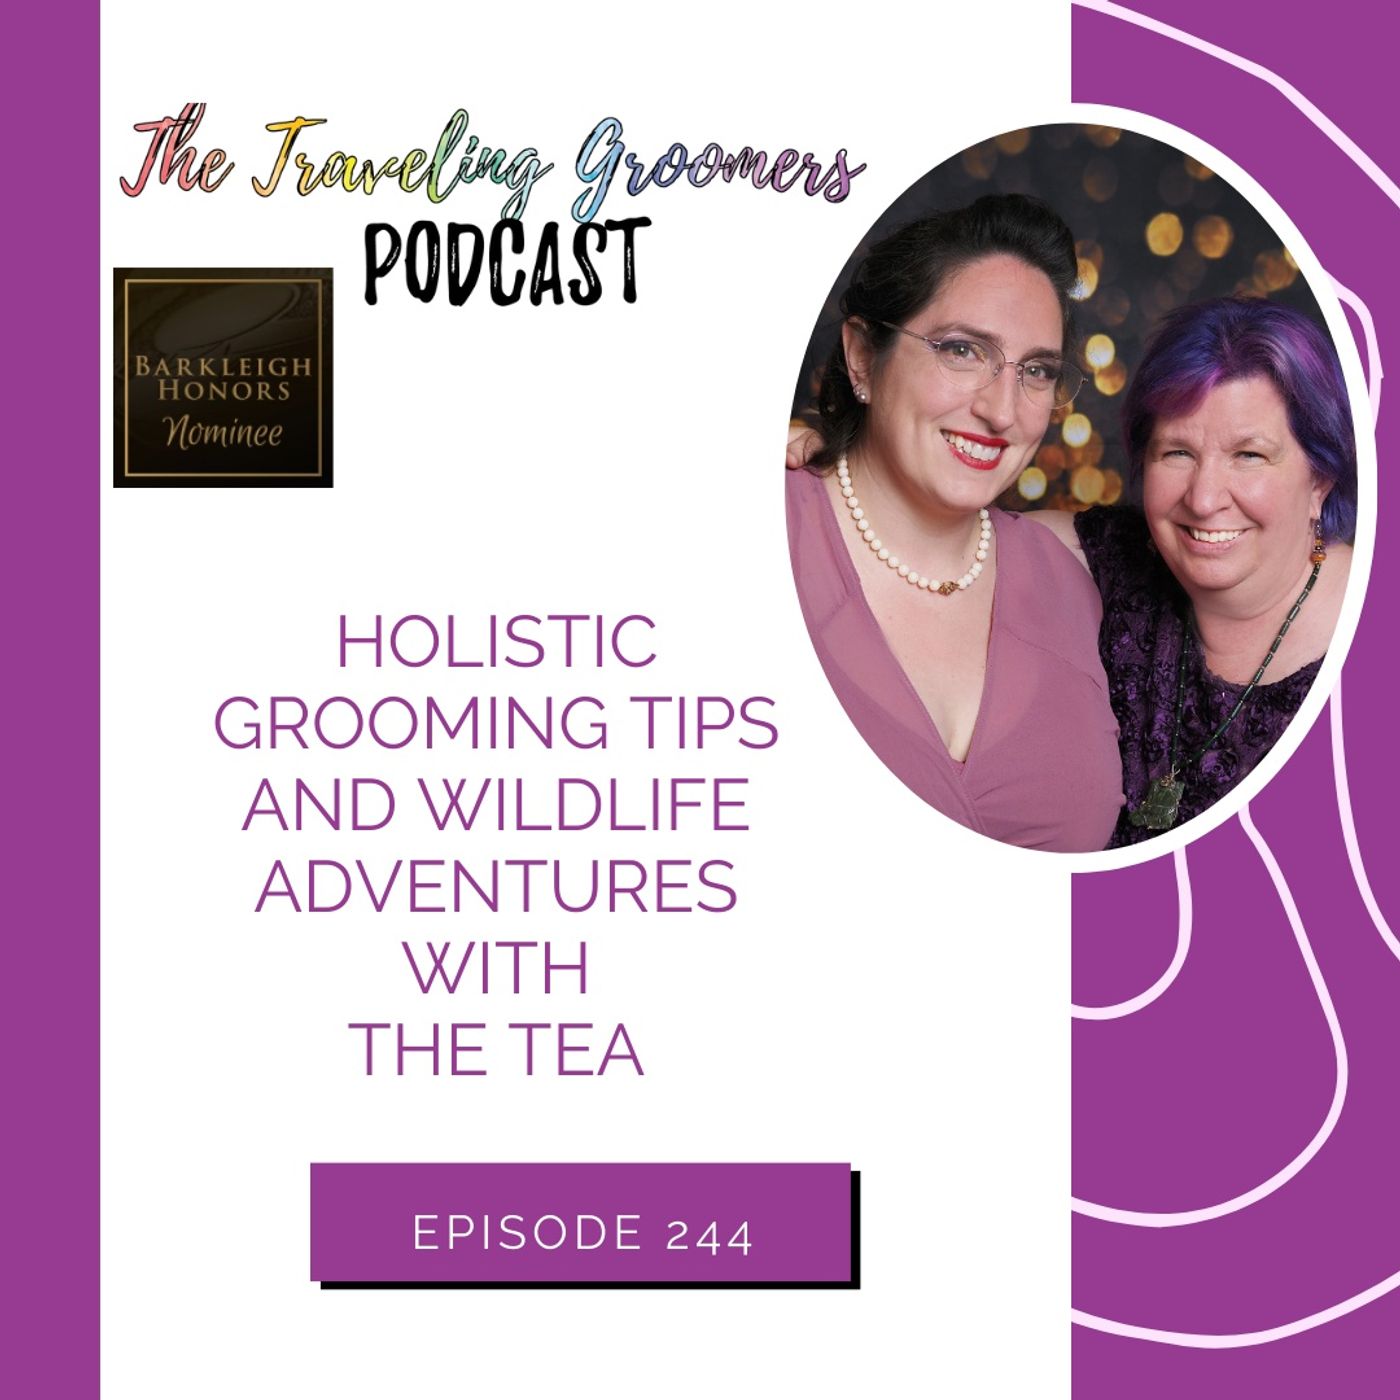 Holistic Grooming Tips and Wildlife Adventures With The Tea